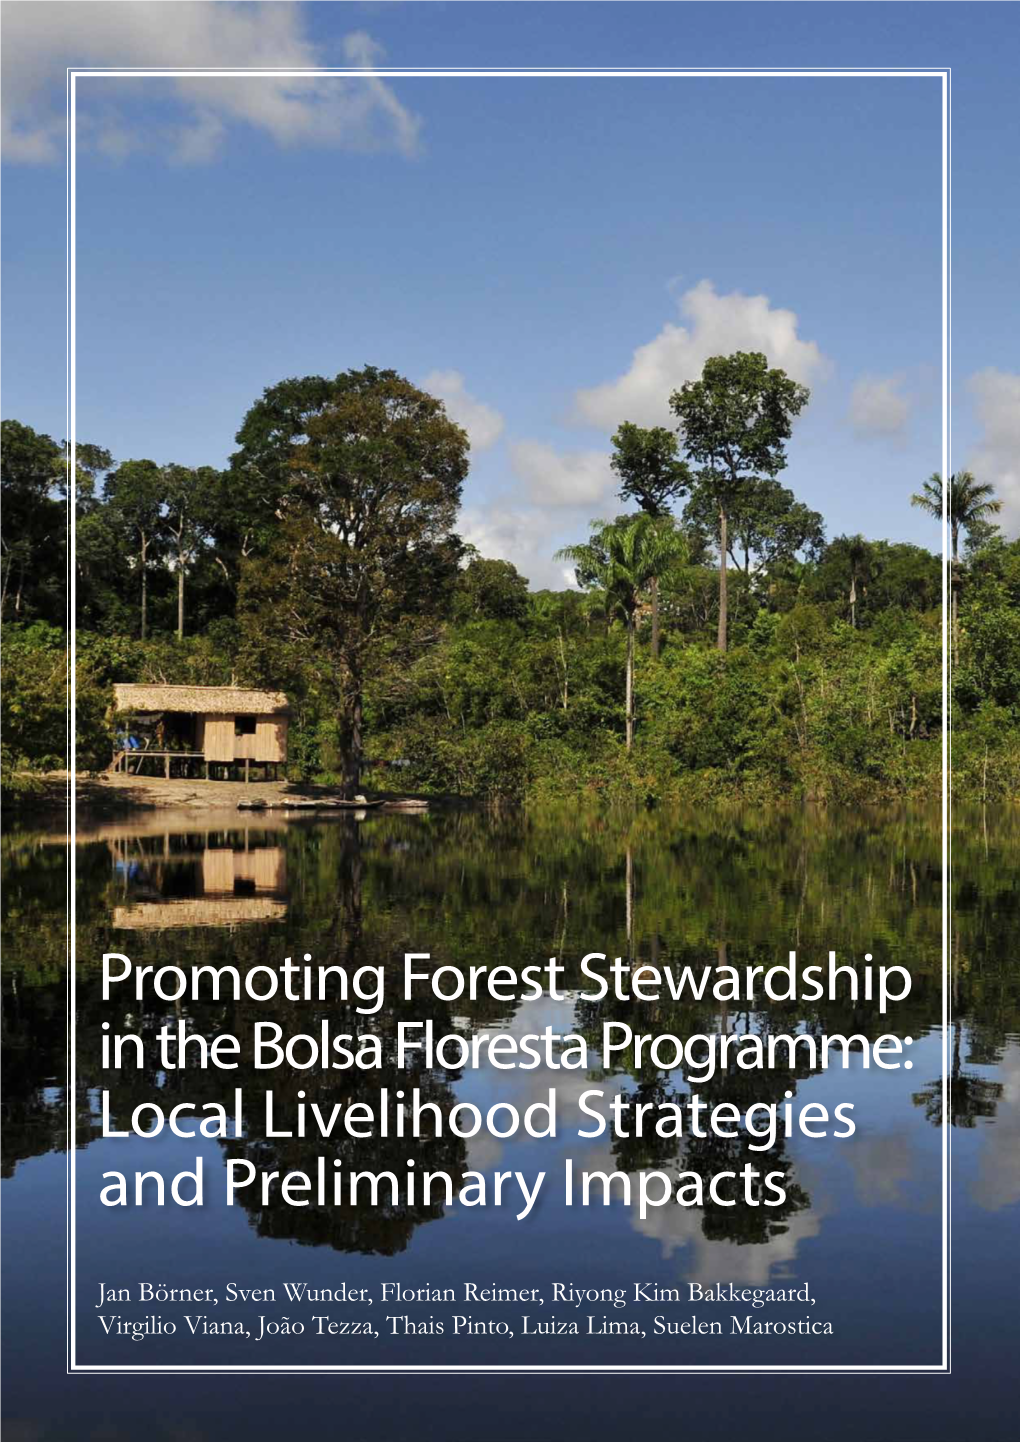 Promoting Forest Stewardship in the Bolsa Floresta Programme: Local Livelihood Strategies and Preliminary Impacts